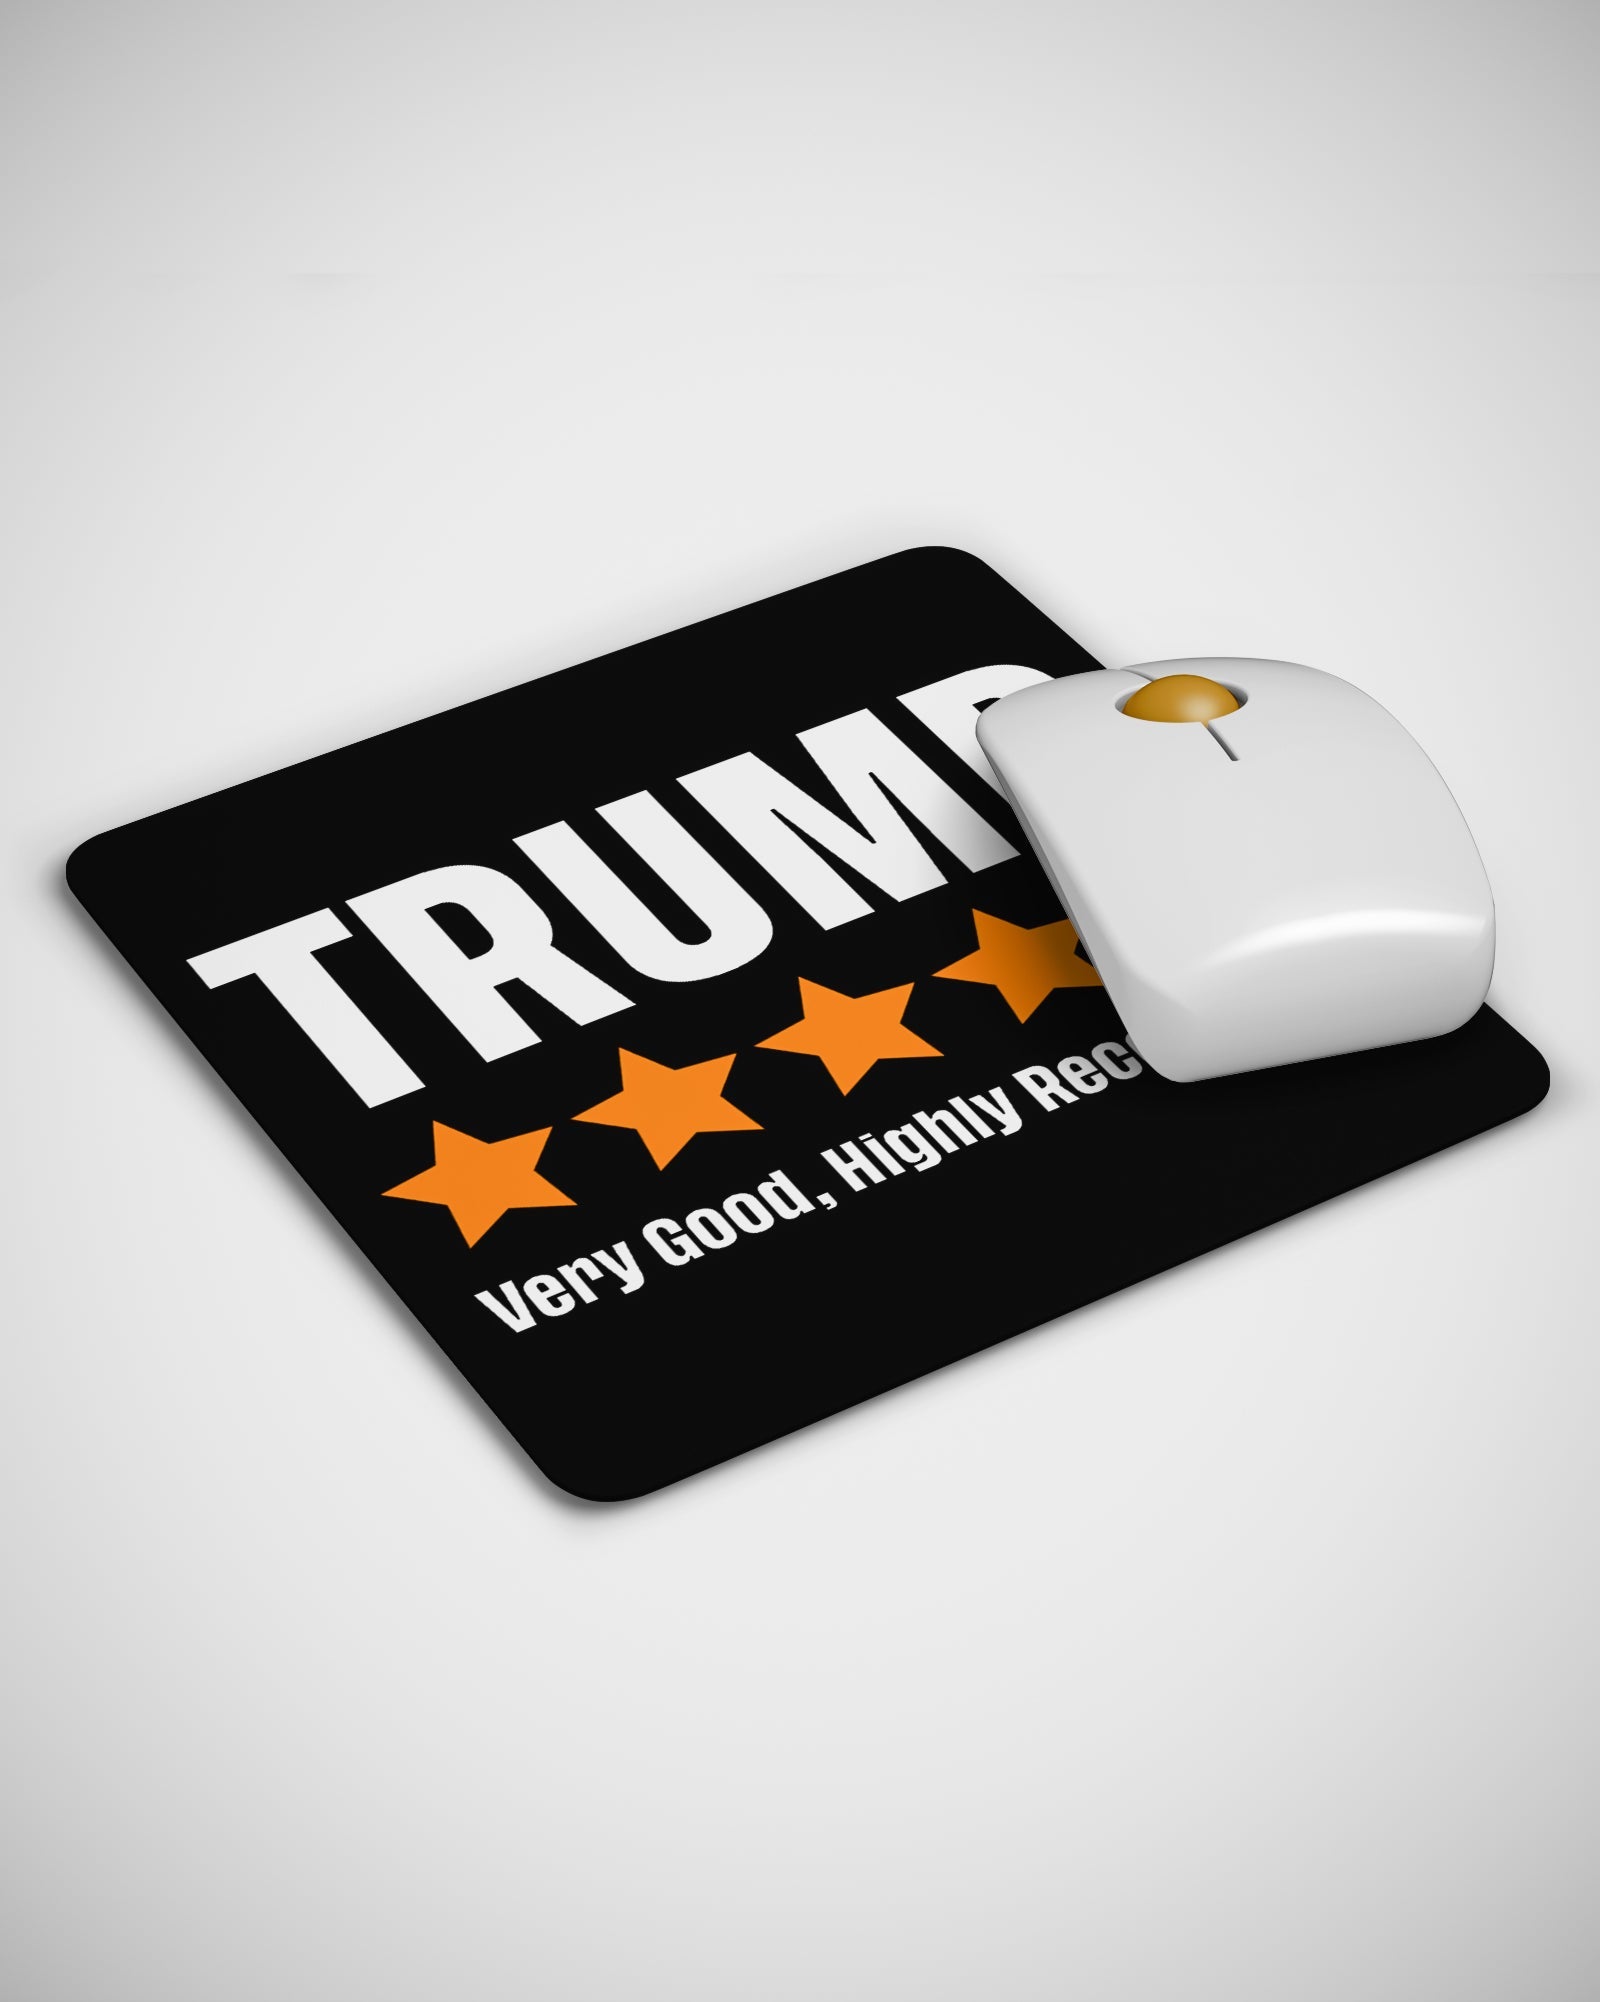 Trump Very Good Highly Recomended Mouse pad